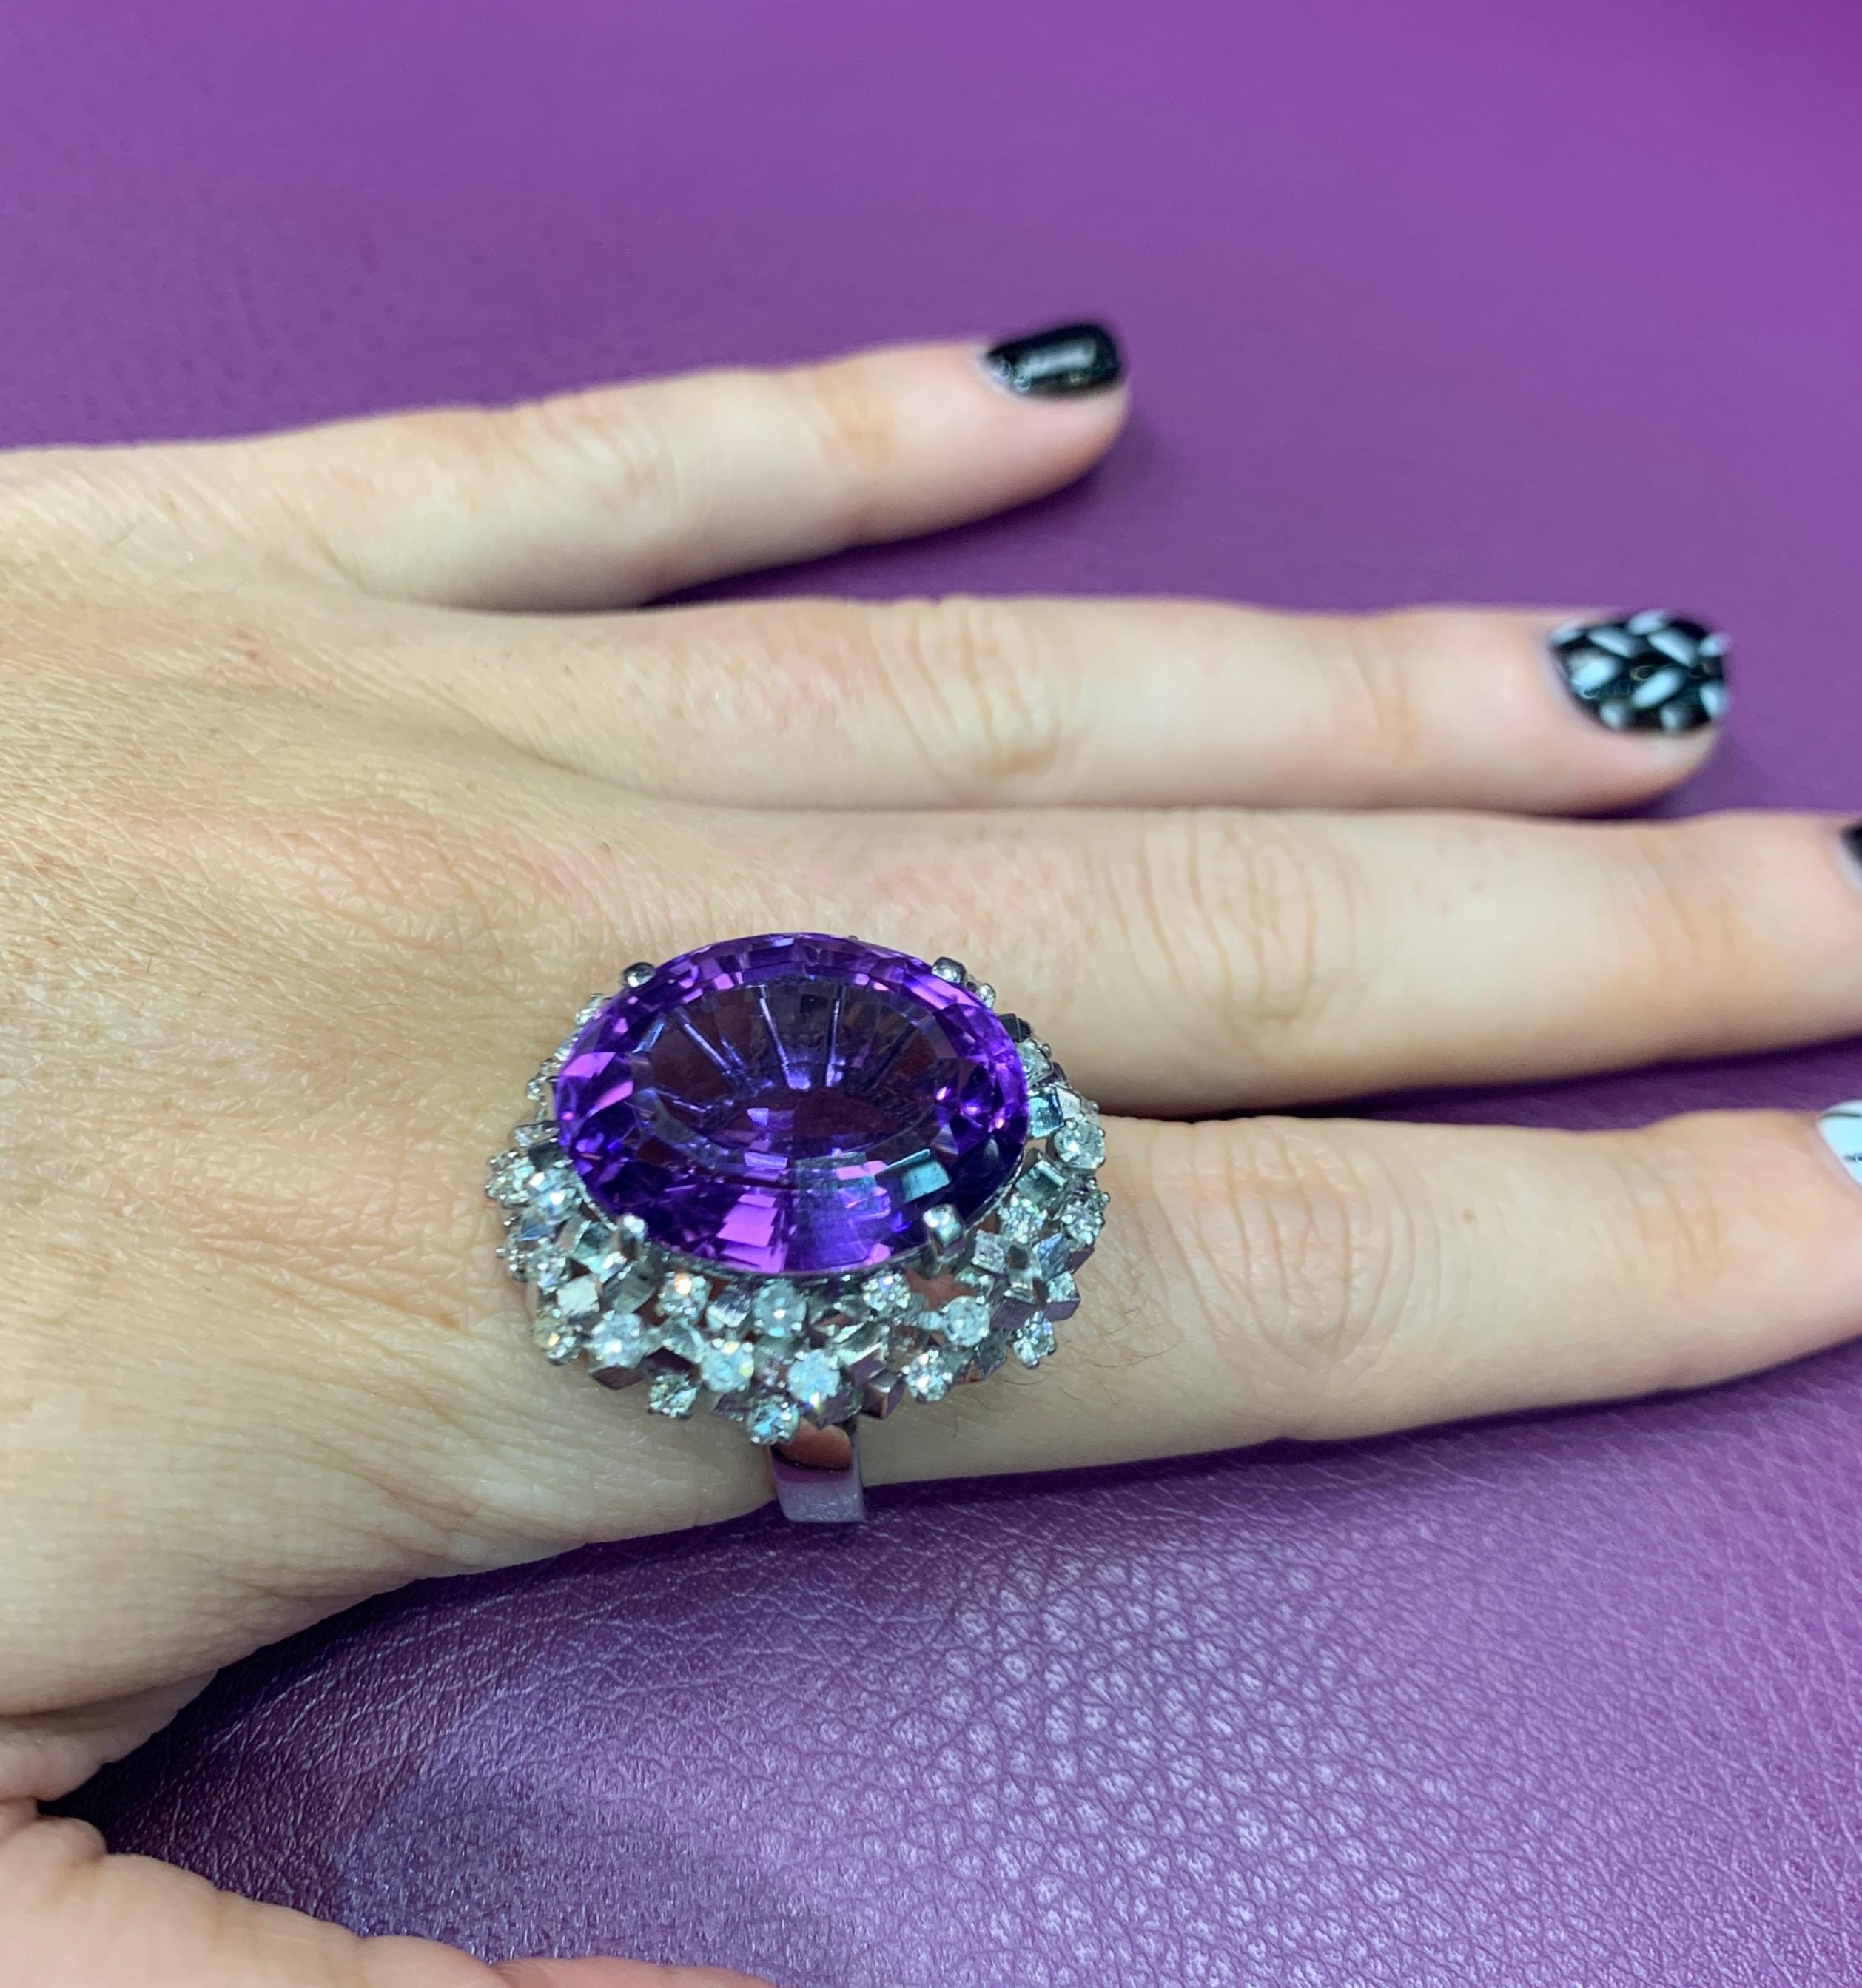 Amethyst & Diamond Cocktail Ring 
Amethyst approximate Weight: 20 carat
Ring Size: 9.5
Re-sizable free of charge 
14 karat white gold